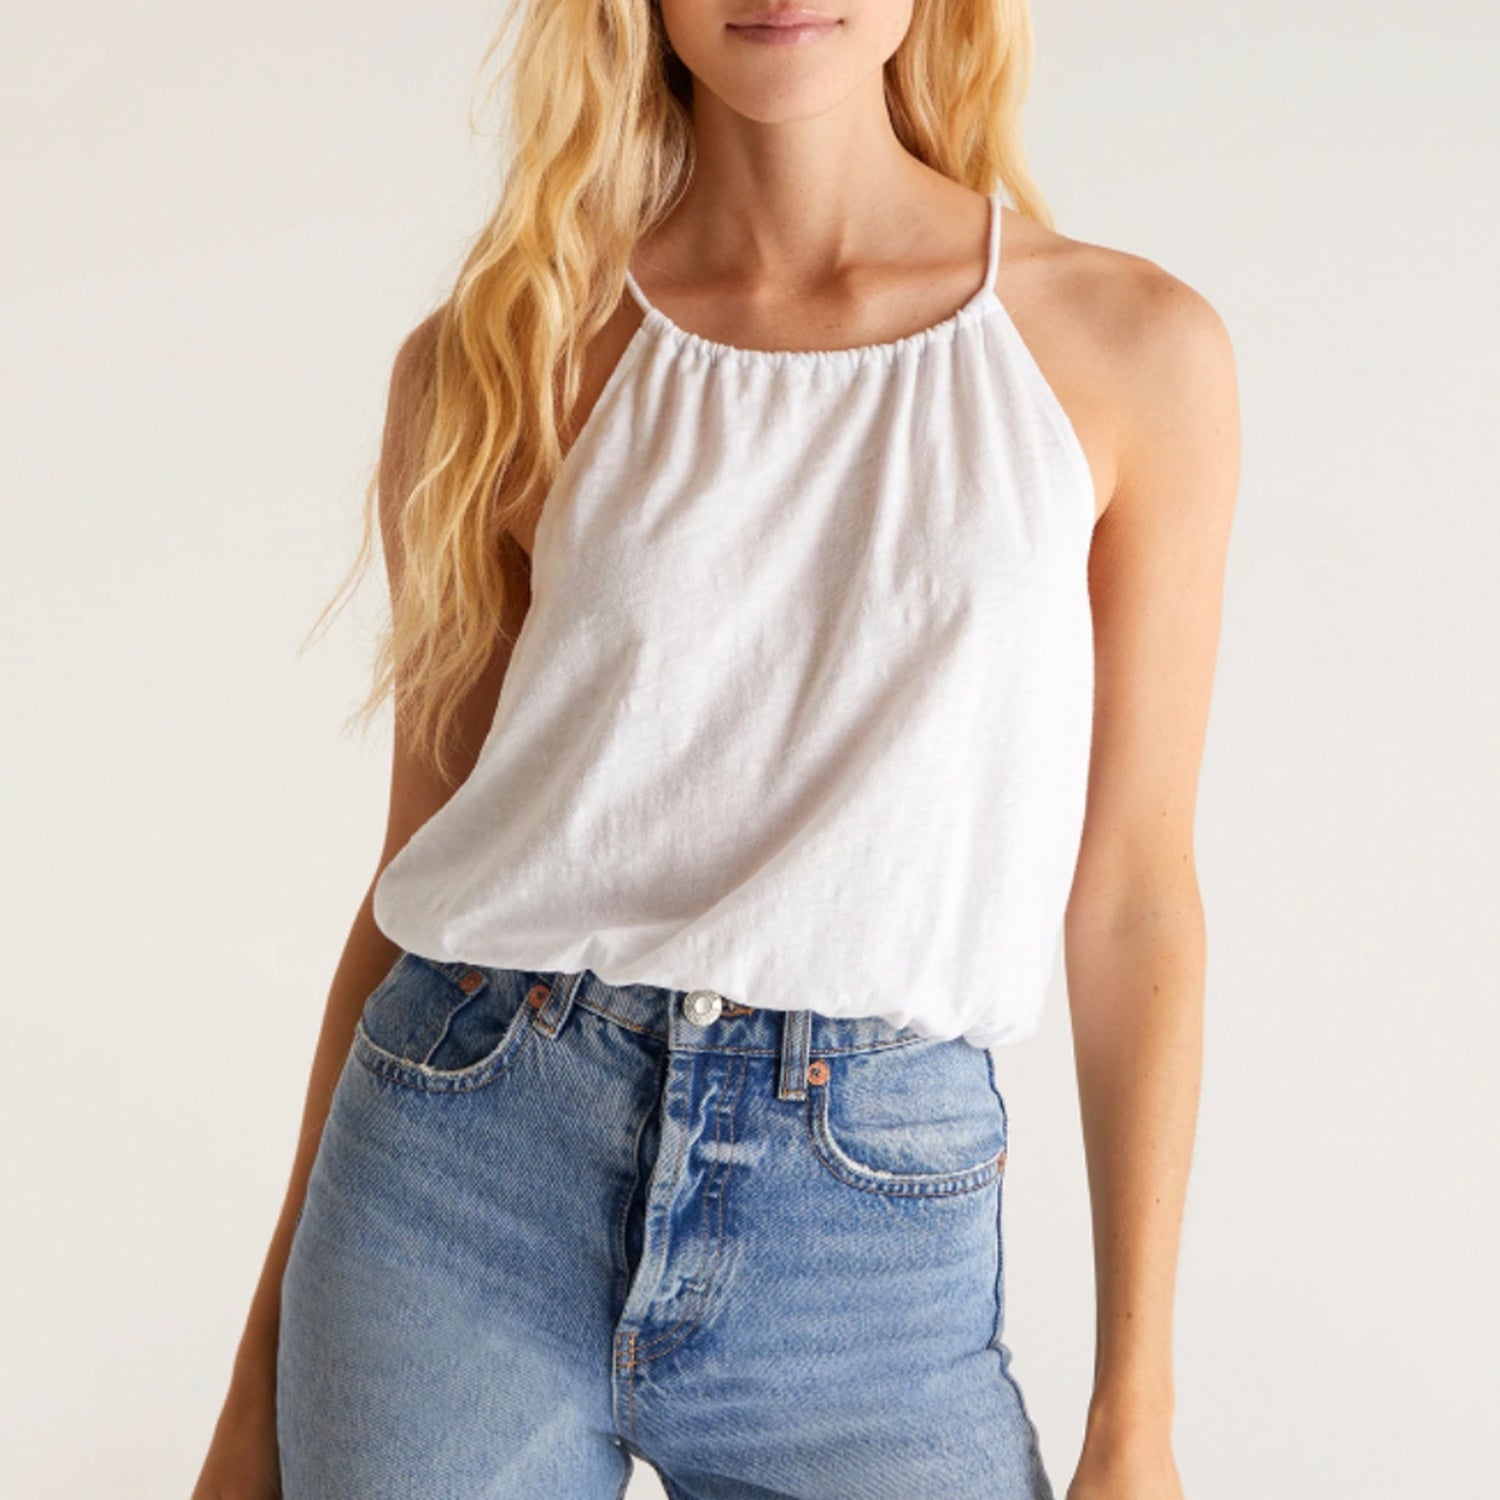 Z Supply Valena Slub Tank. The cropped look is in! This tank will pair perfectly with your fave high-waisted bottoms. A relaxed fit and made using a soft cotton Slub Jersey Knit fabric that's so soft and comfortable